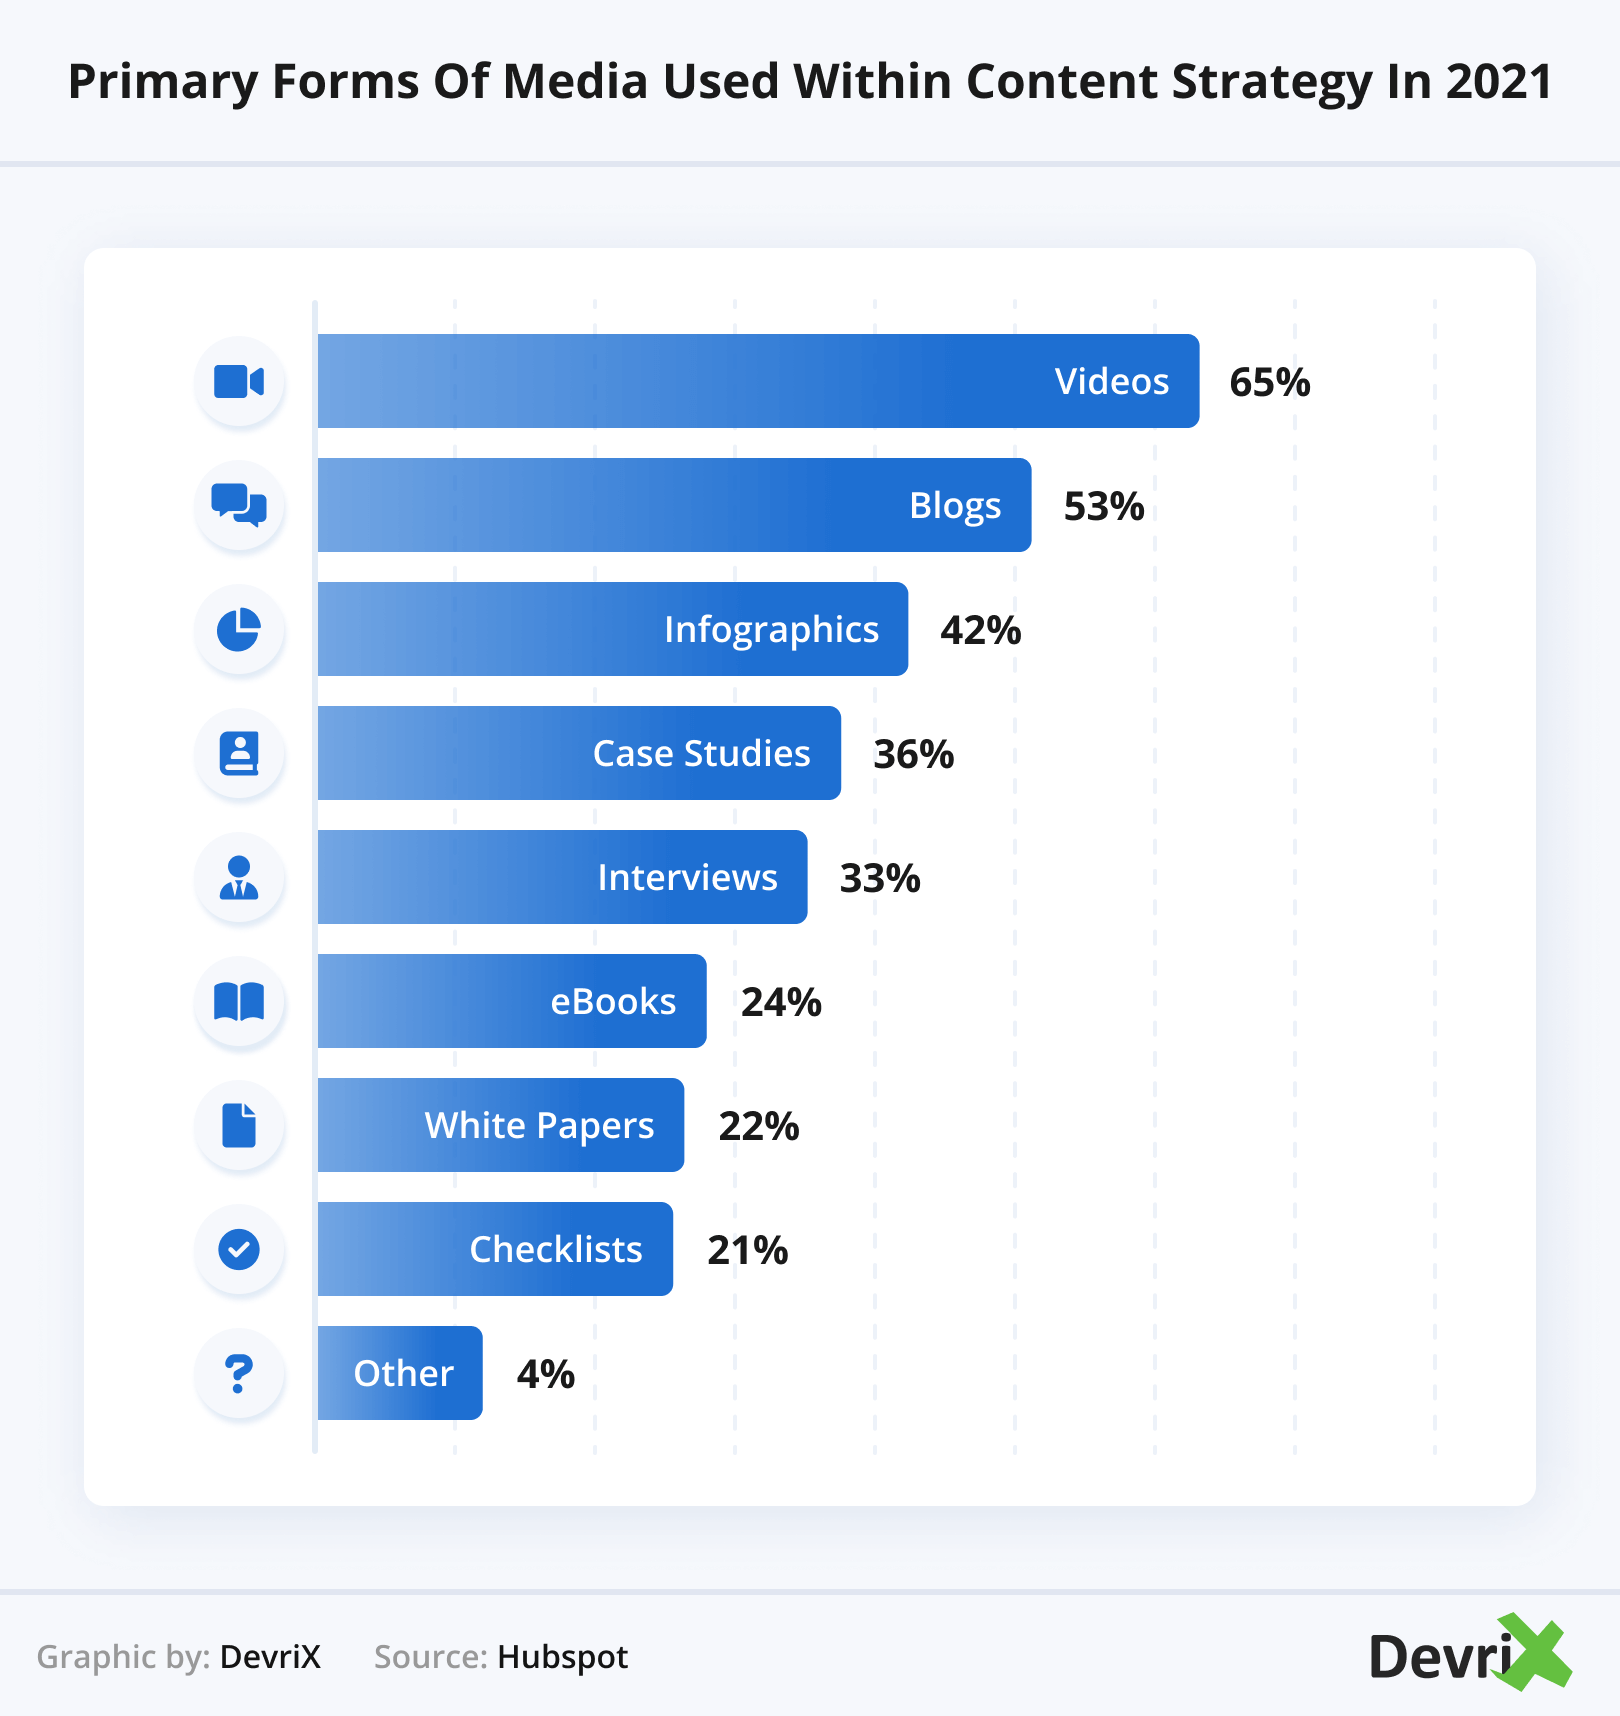 Primary Forms of Media Used Within Content Strategy in 2021